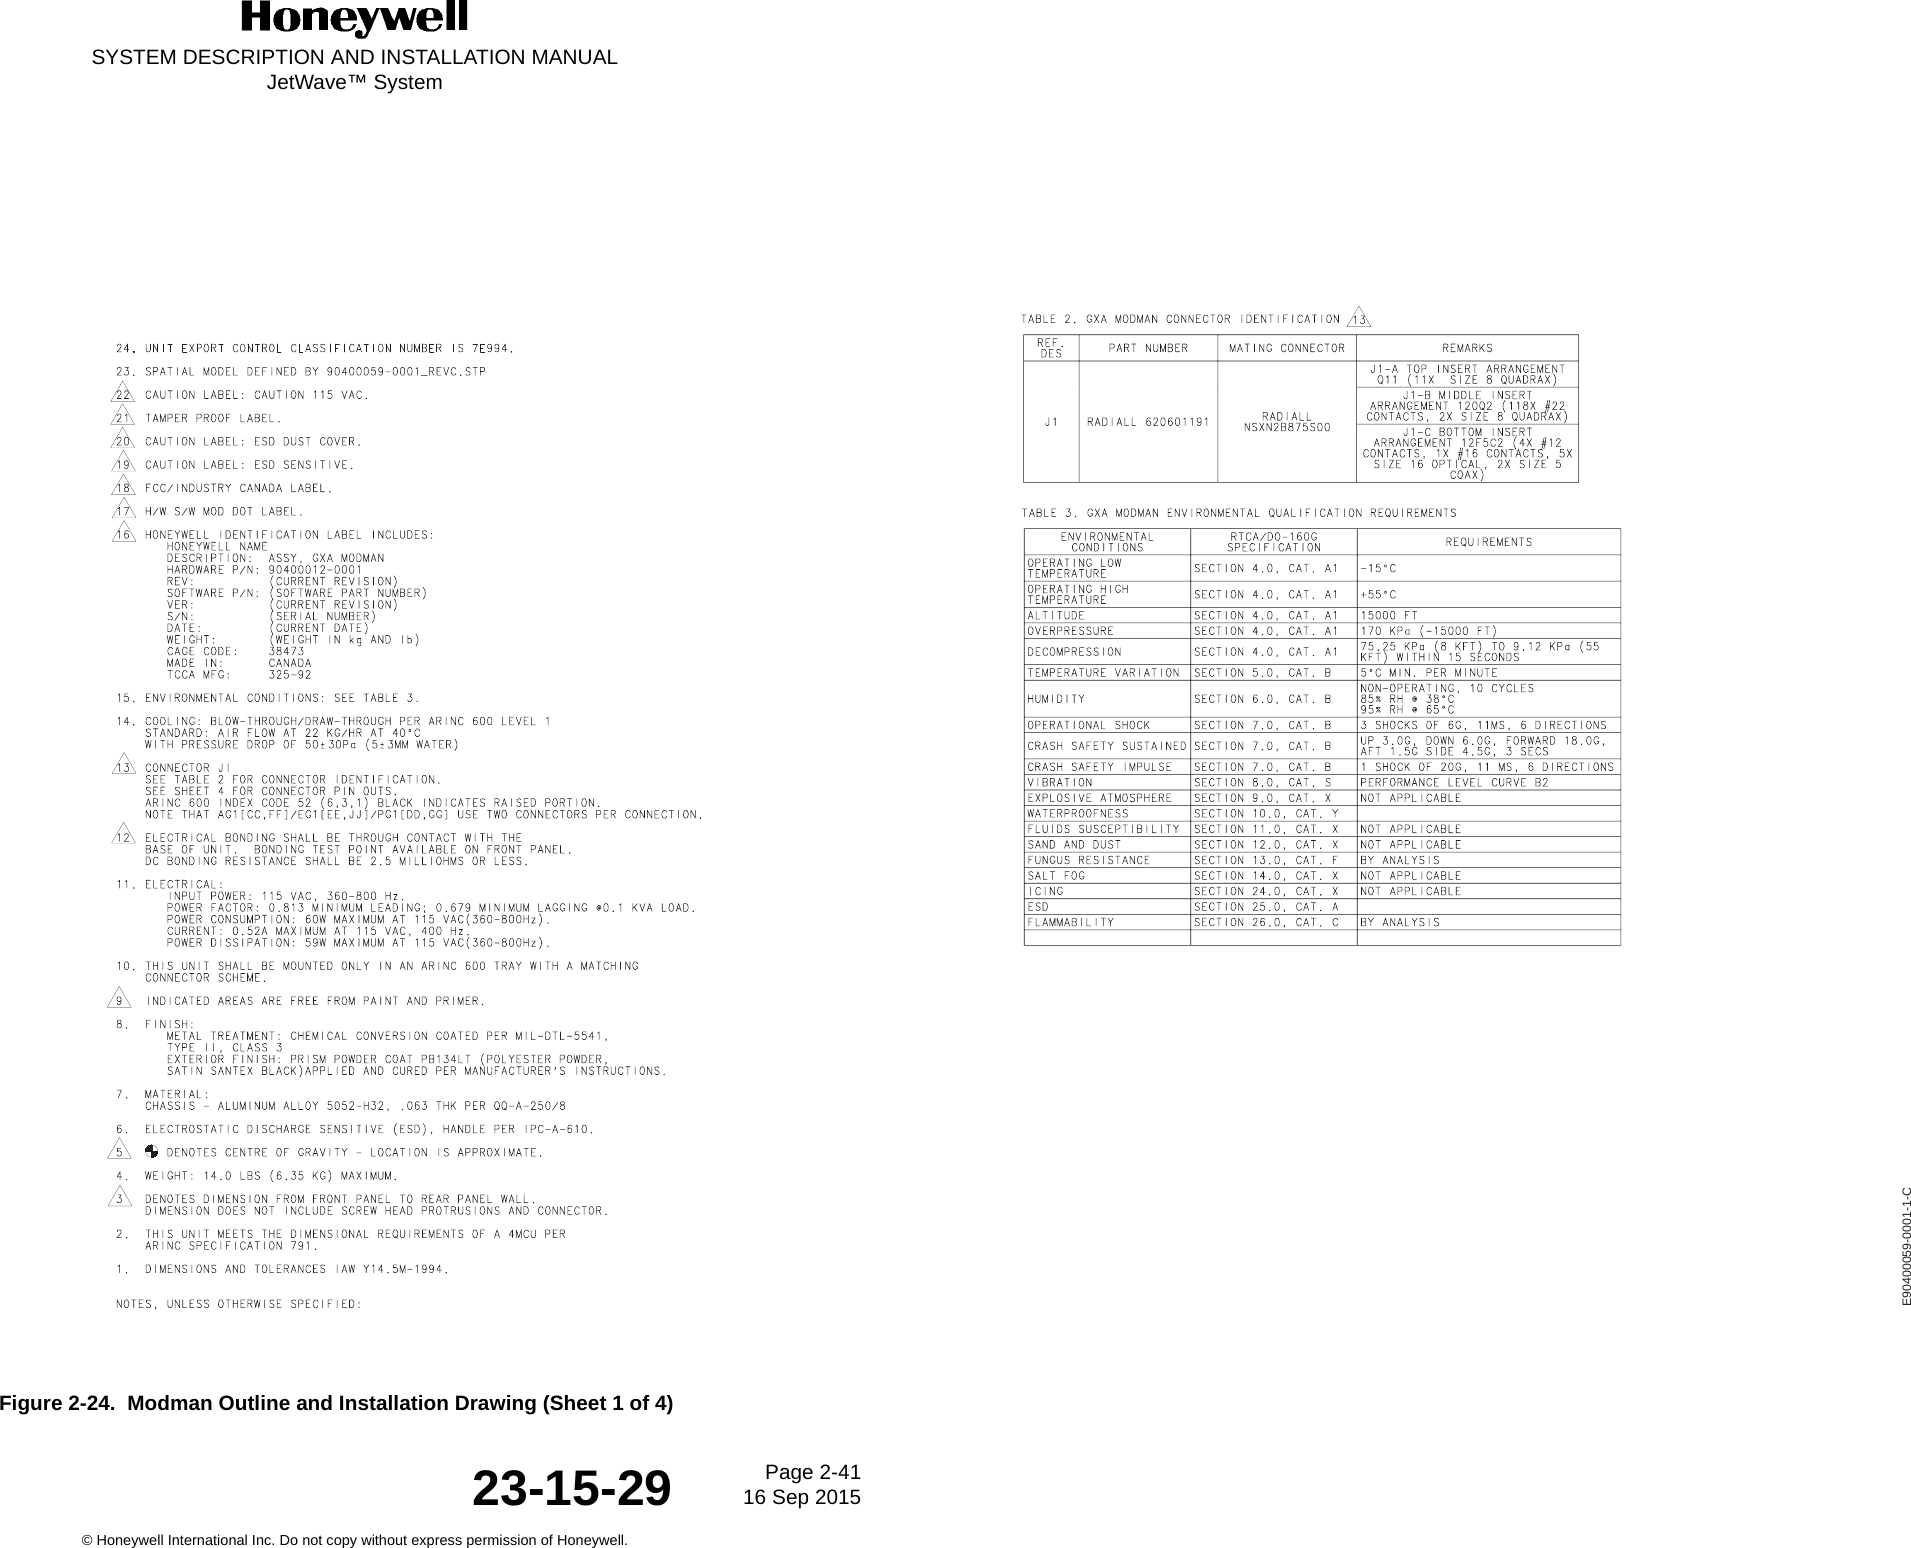 SYSTEM DESCRIPTION AND INSTALLATION MANUALJetWave™ SystemPage 2-41 16 Sep 2015© Honeywell International Inc. Do not copy without express permission of Honeywell.23-15-29Figure 2-24.  Modman Outline and Installation Drawing (Sheet 1 of 4)E90400059-0001-1-C